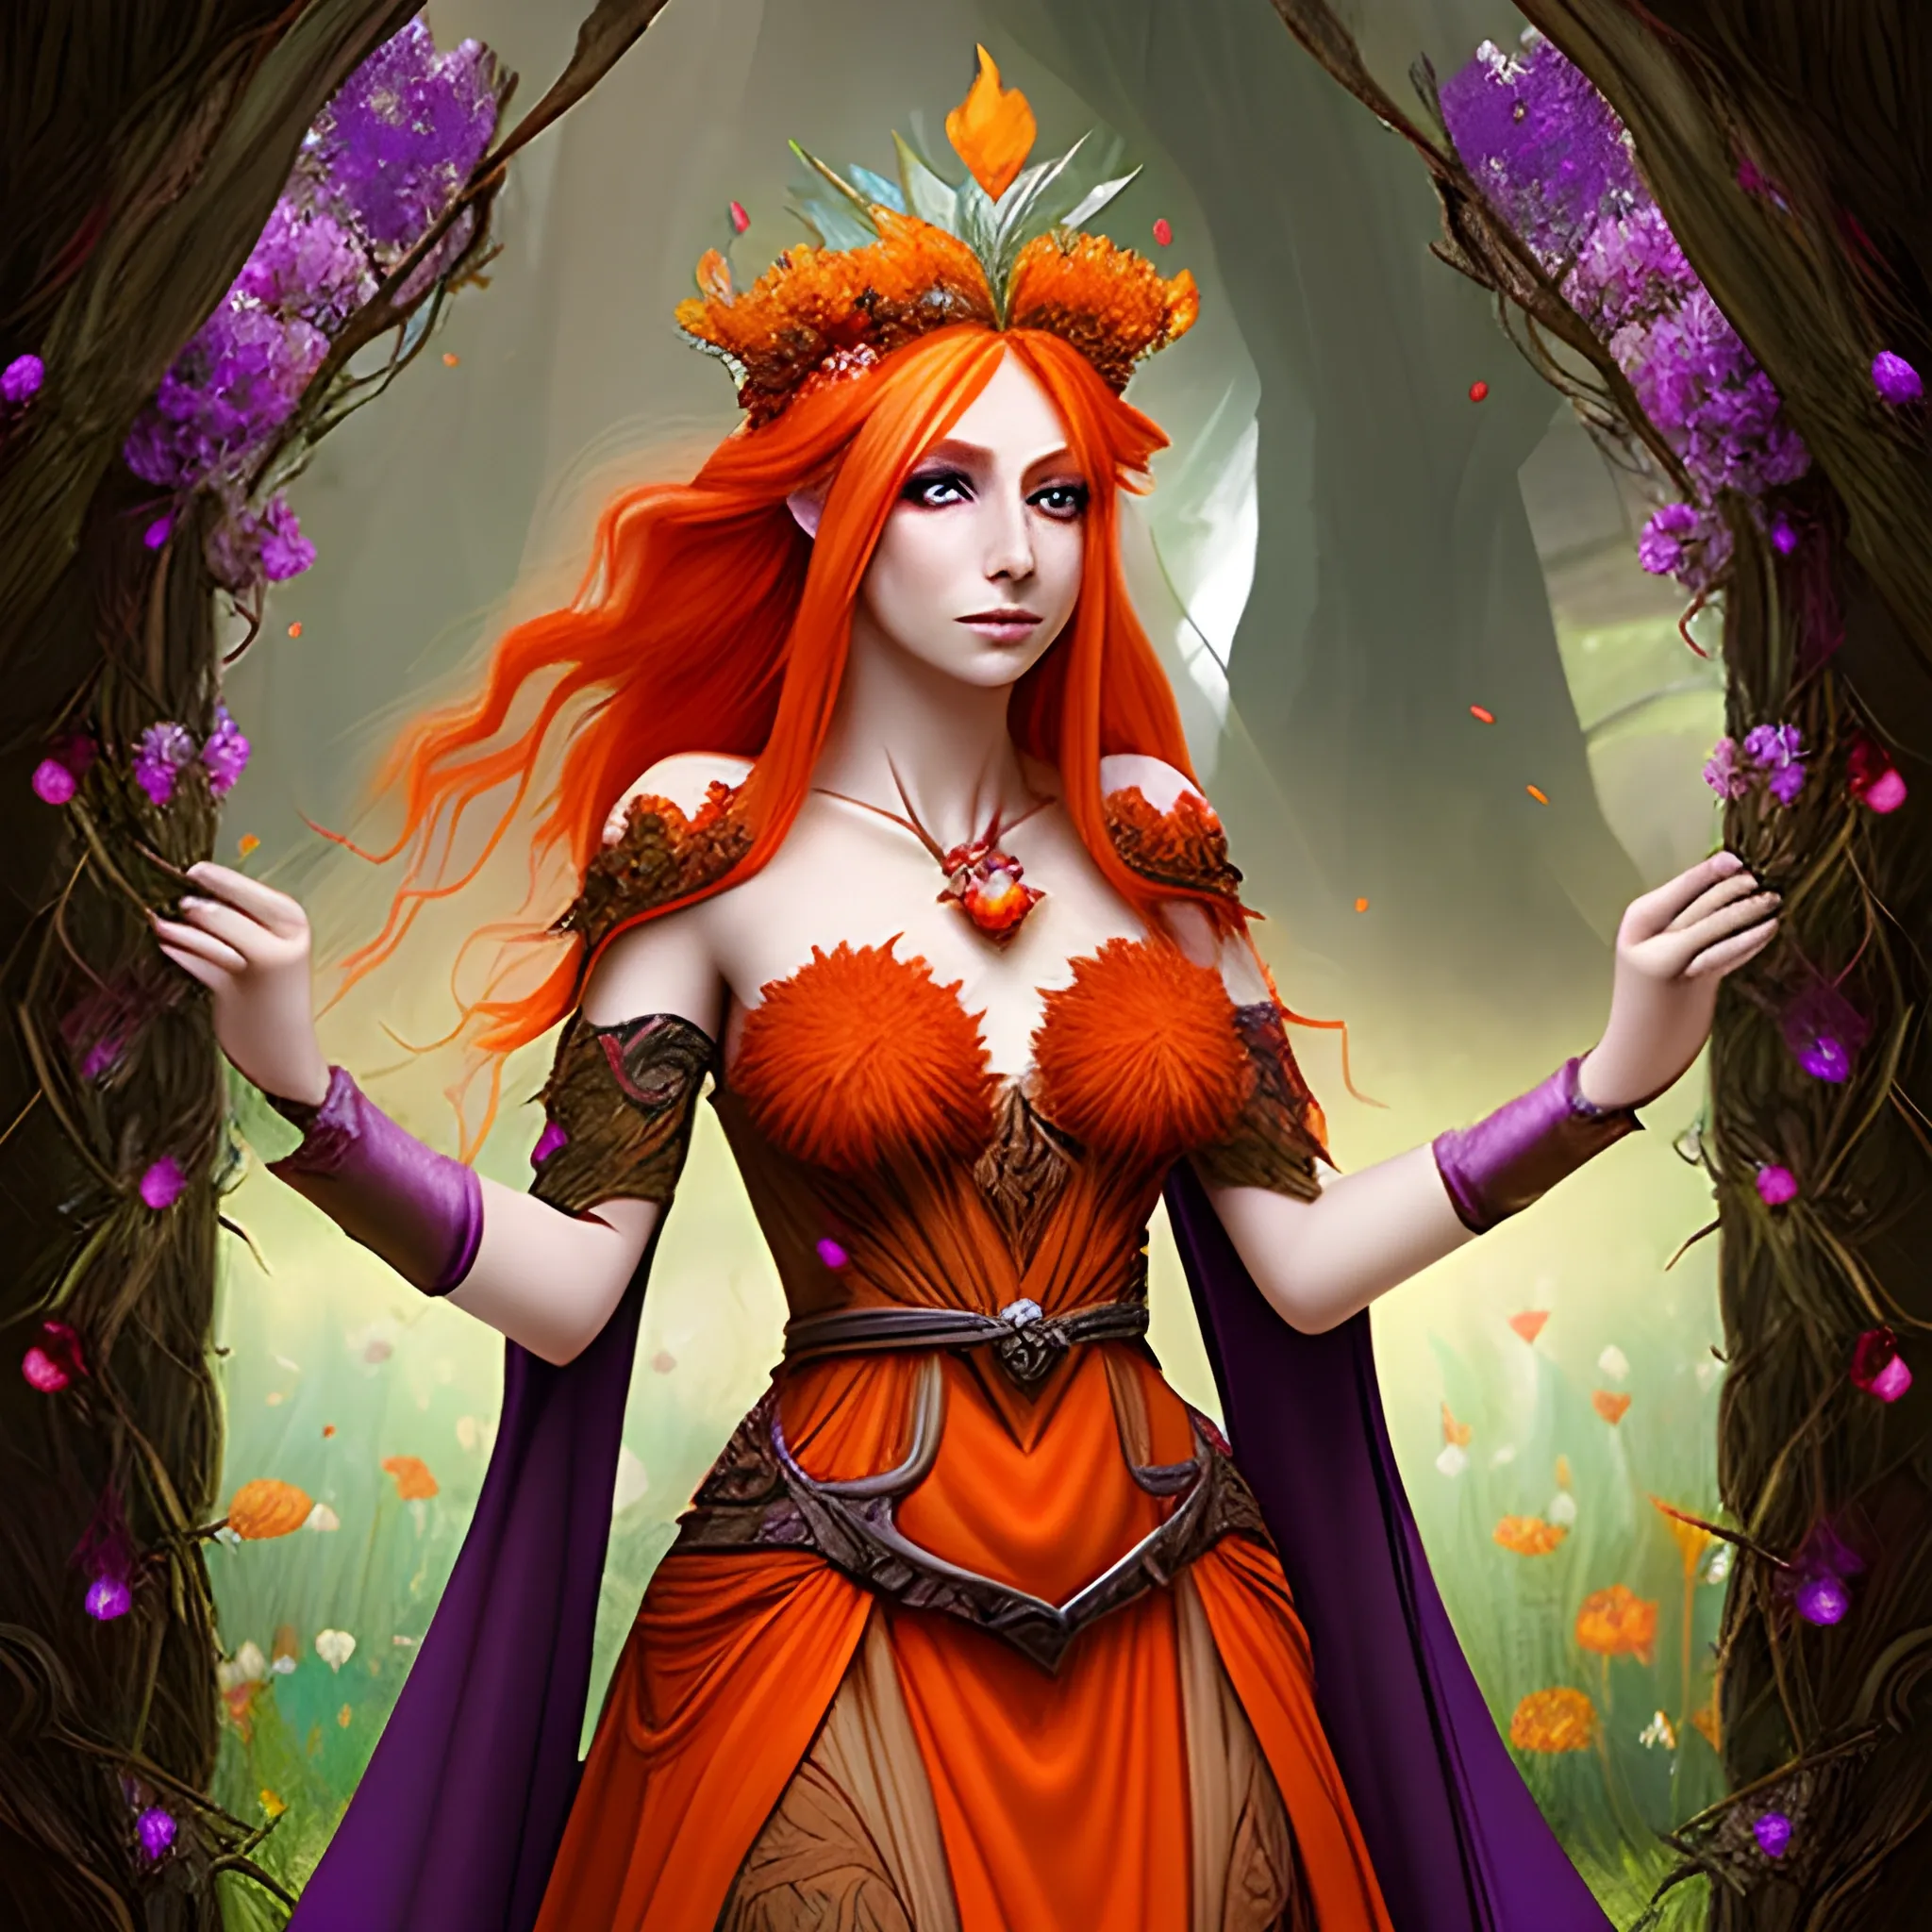 Female Eladrin with fiery red hair with orange highlights. Wearing a dress made of blossoming flowers. Heart shaped face, purple eyes, looking forward. Wearing a crown made of flowers.
Fantasy